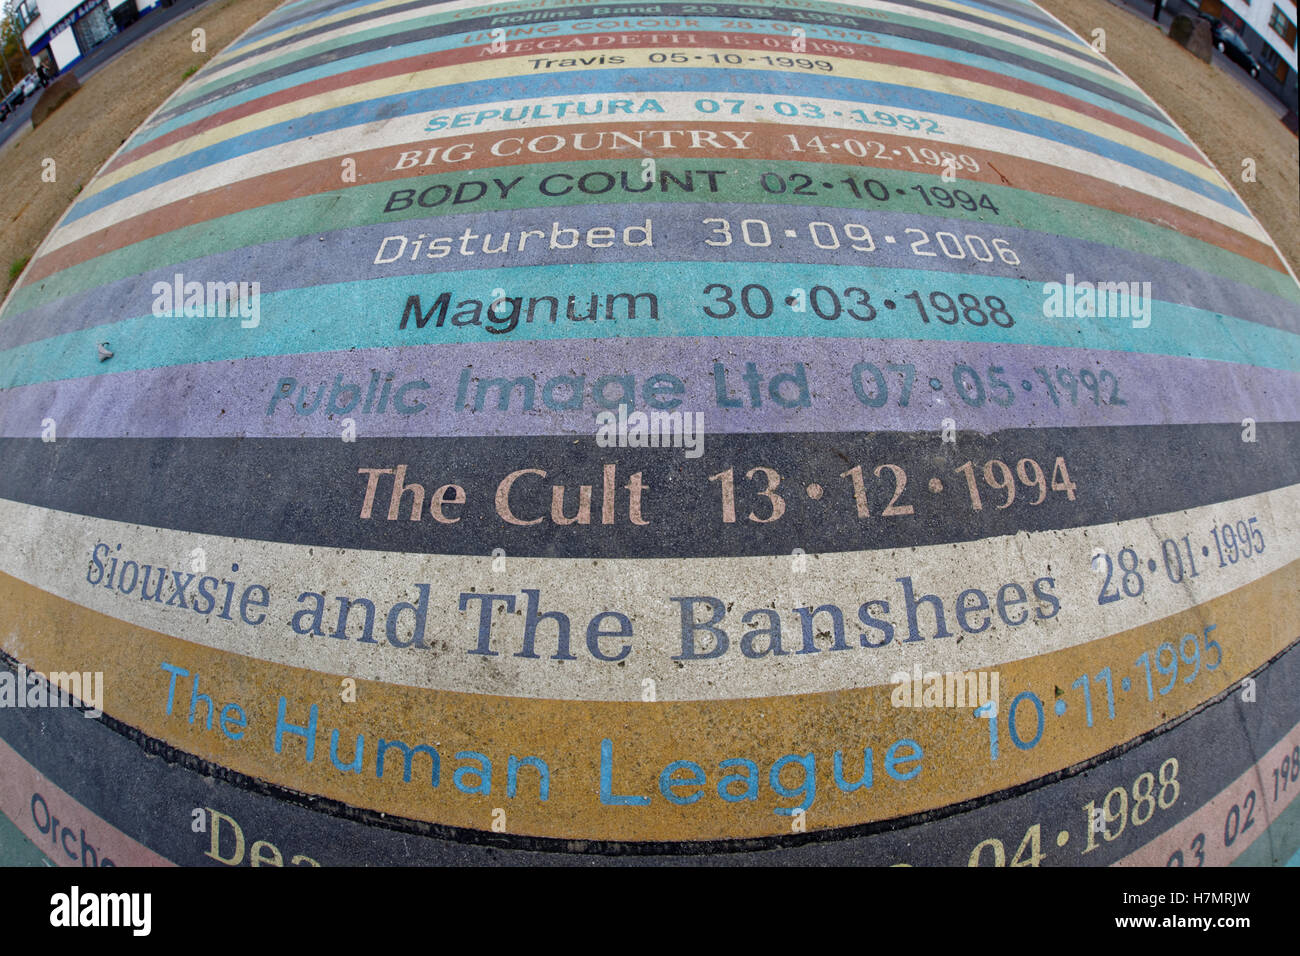 Glasgow Barras Barrowland Park album pathway celebration public artwork walkway with the acts and dates rhey performed there Stock Photo